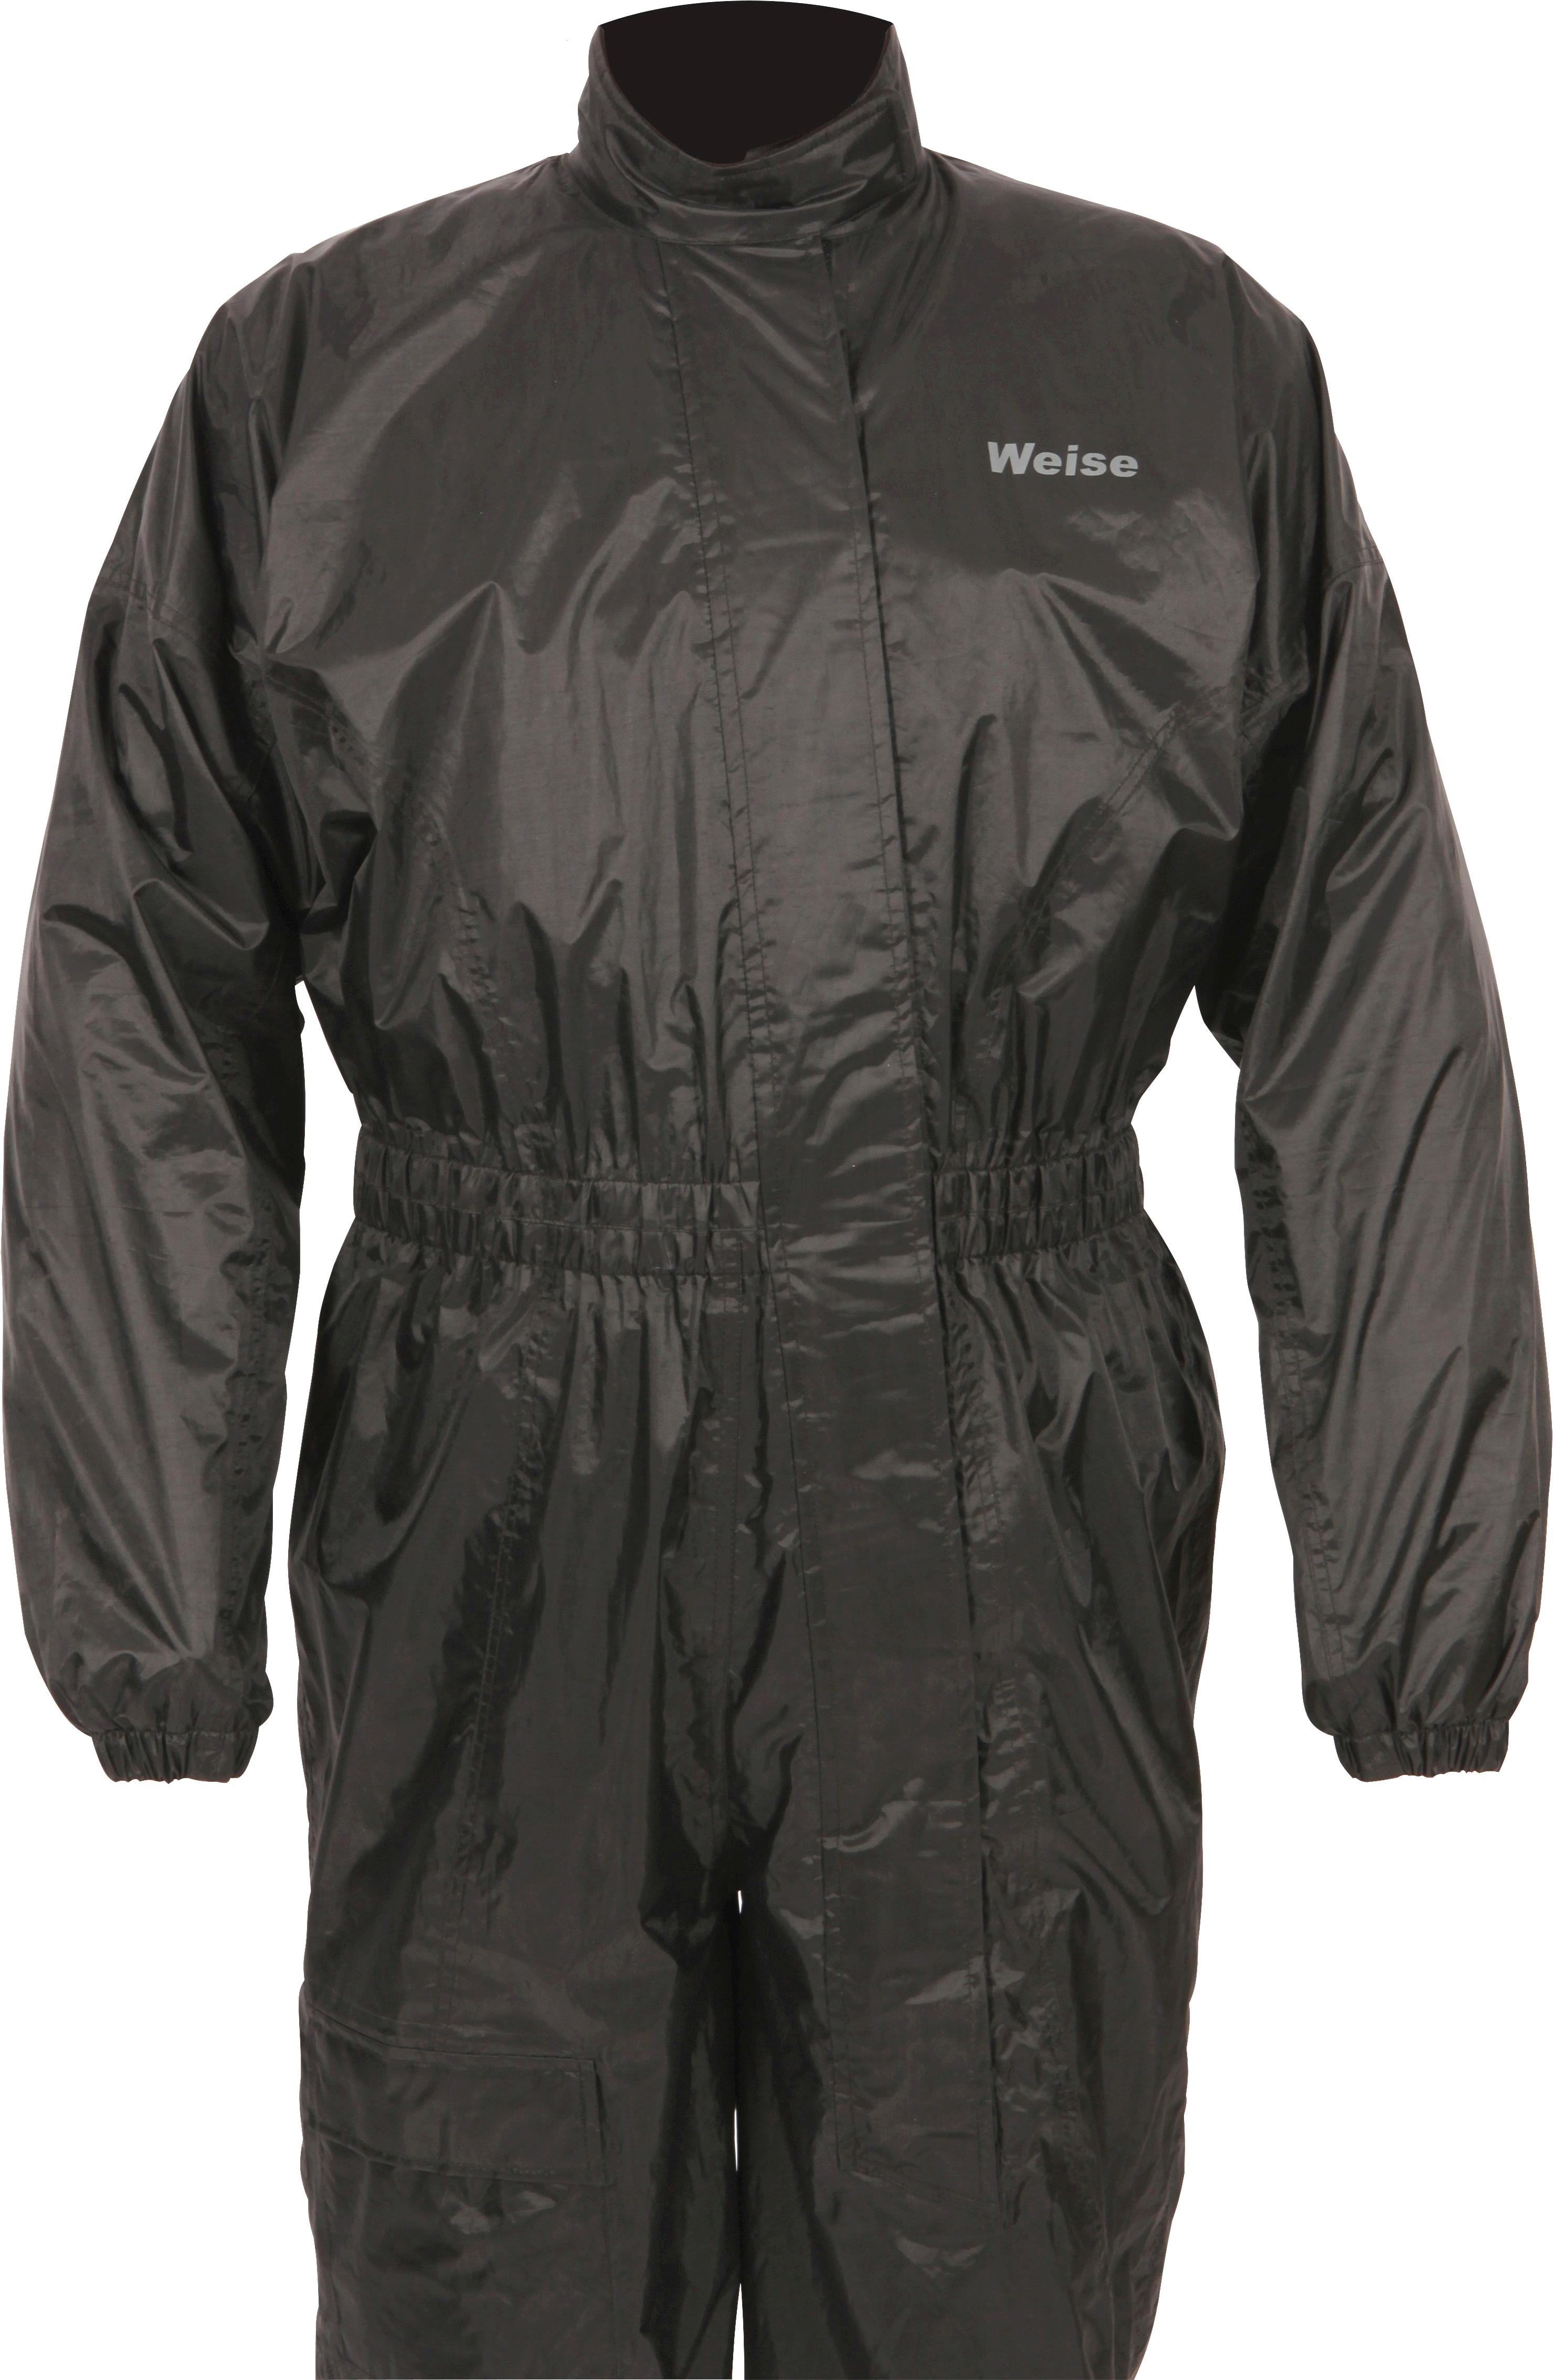 Weise Tempest Oversuit 6Xl